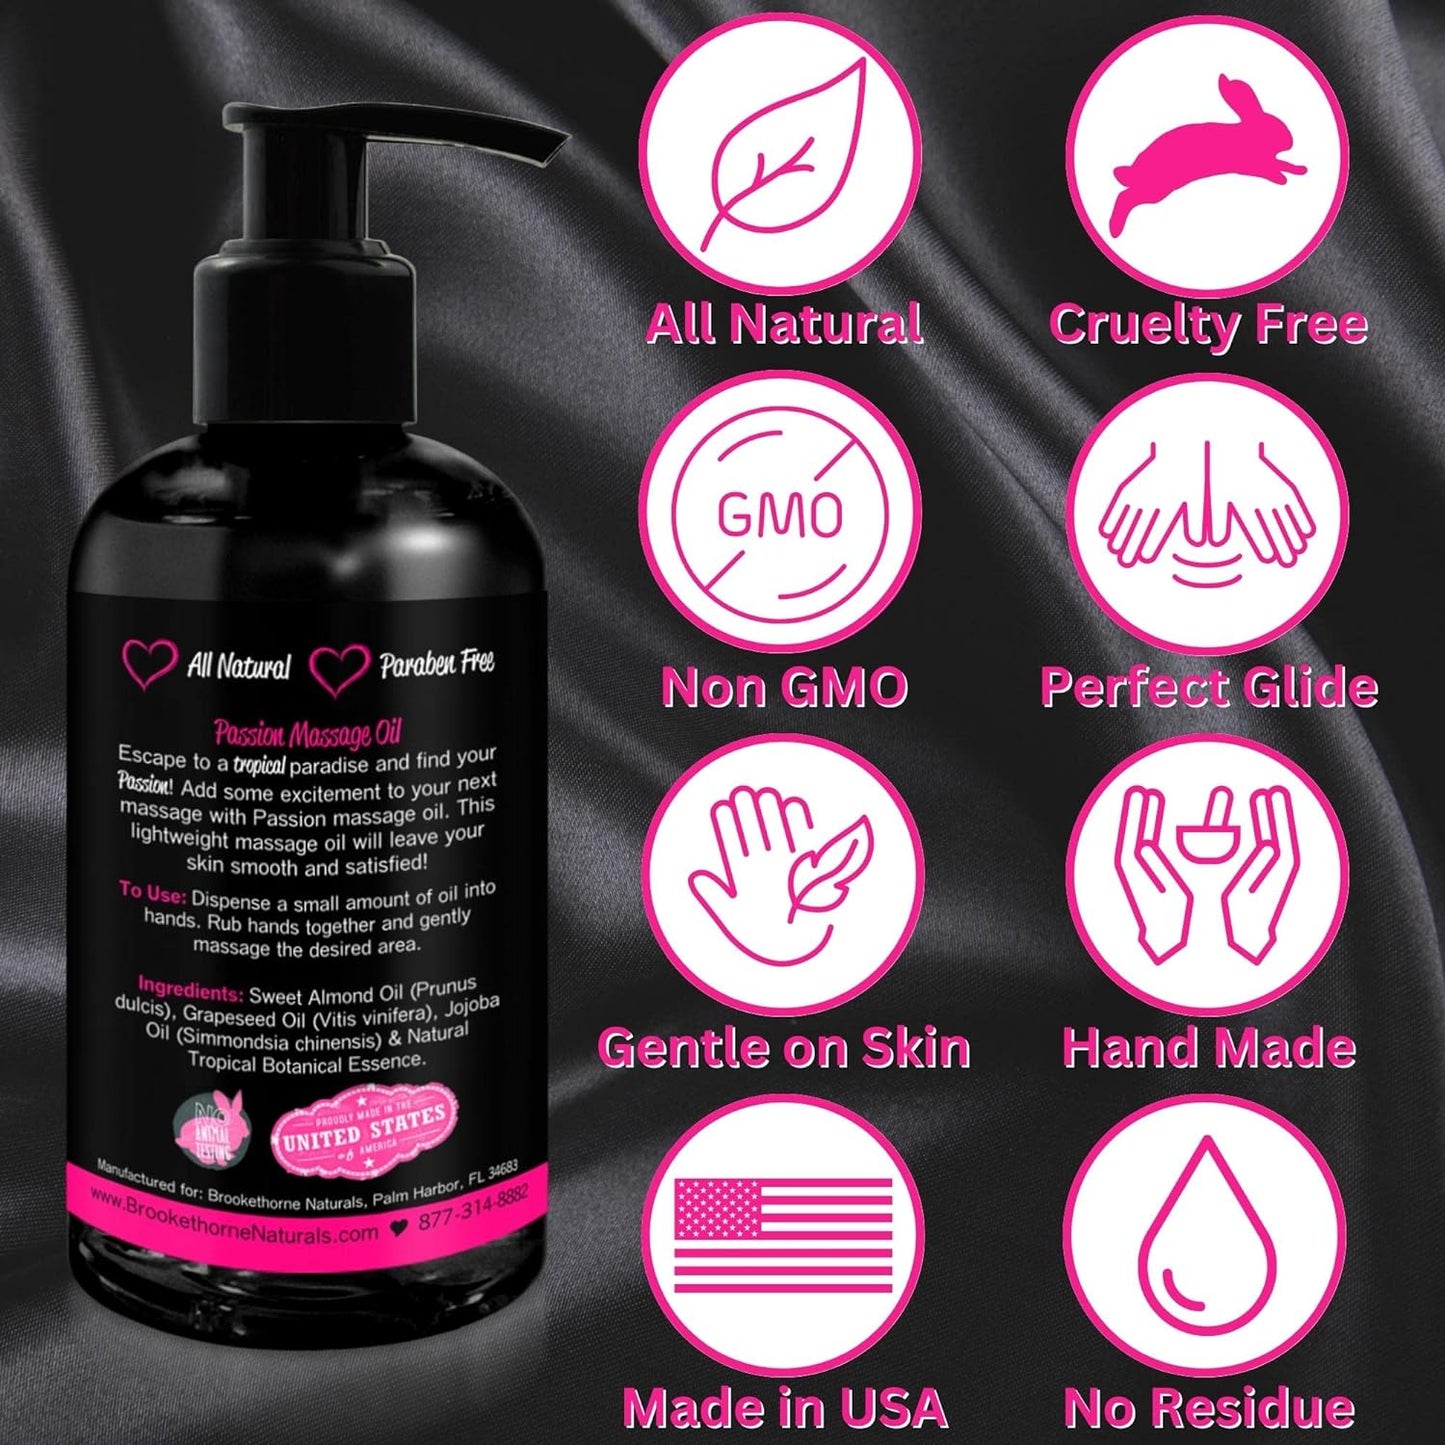 Passion Sensual Massage Oil for Intimate Moments & Enhanced Stimulation. All Natural, Tropical Paradise Scent with Almond & Jojoba Oil. Ideal for Full Body & Muscle Massage – for Women & Men - 8 oz